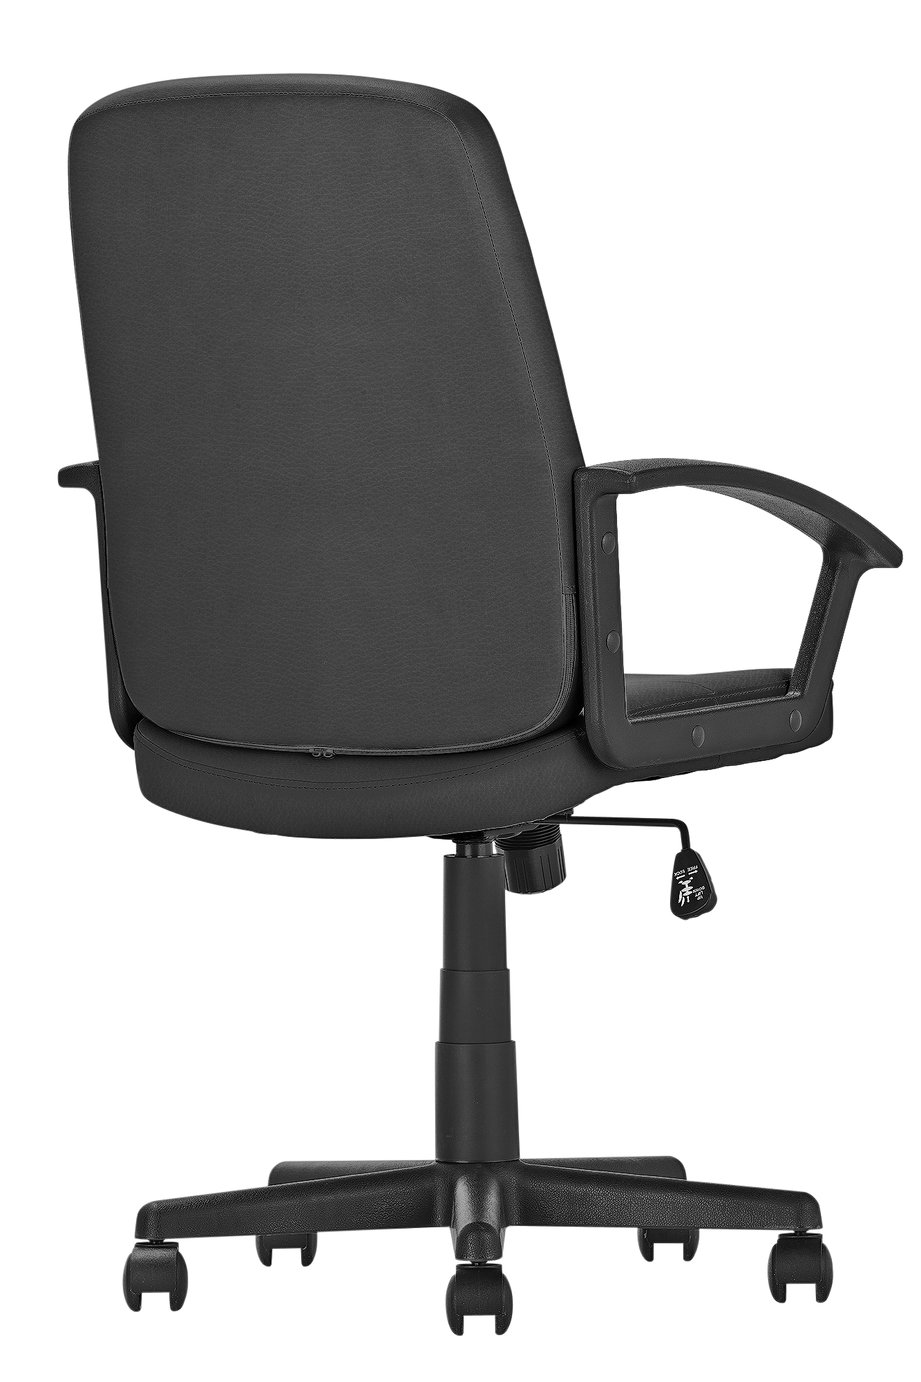 Argos Home Brixham Managers Office Chair Reviews